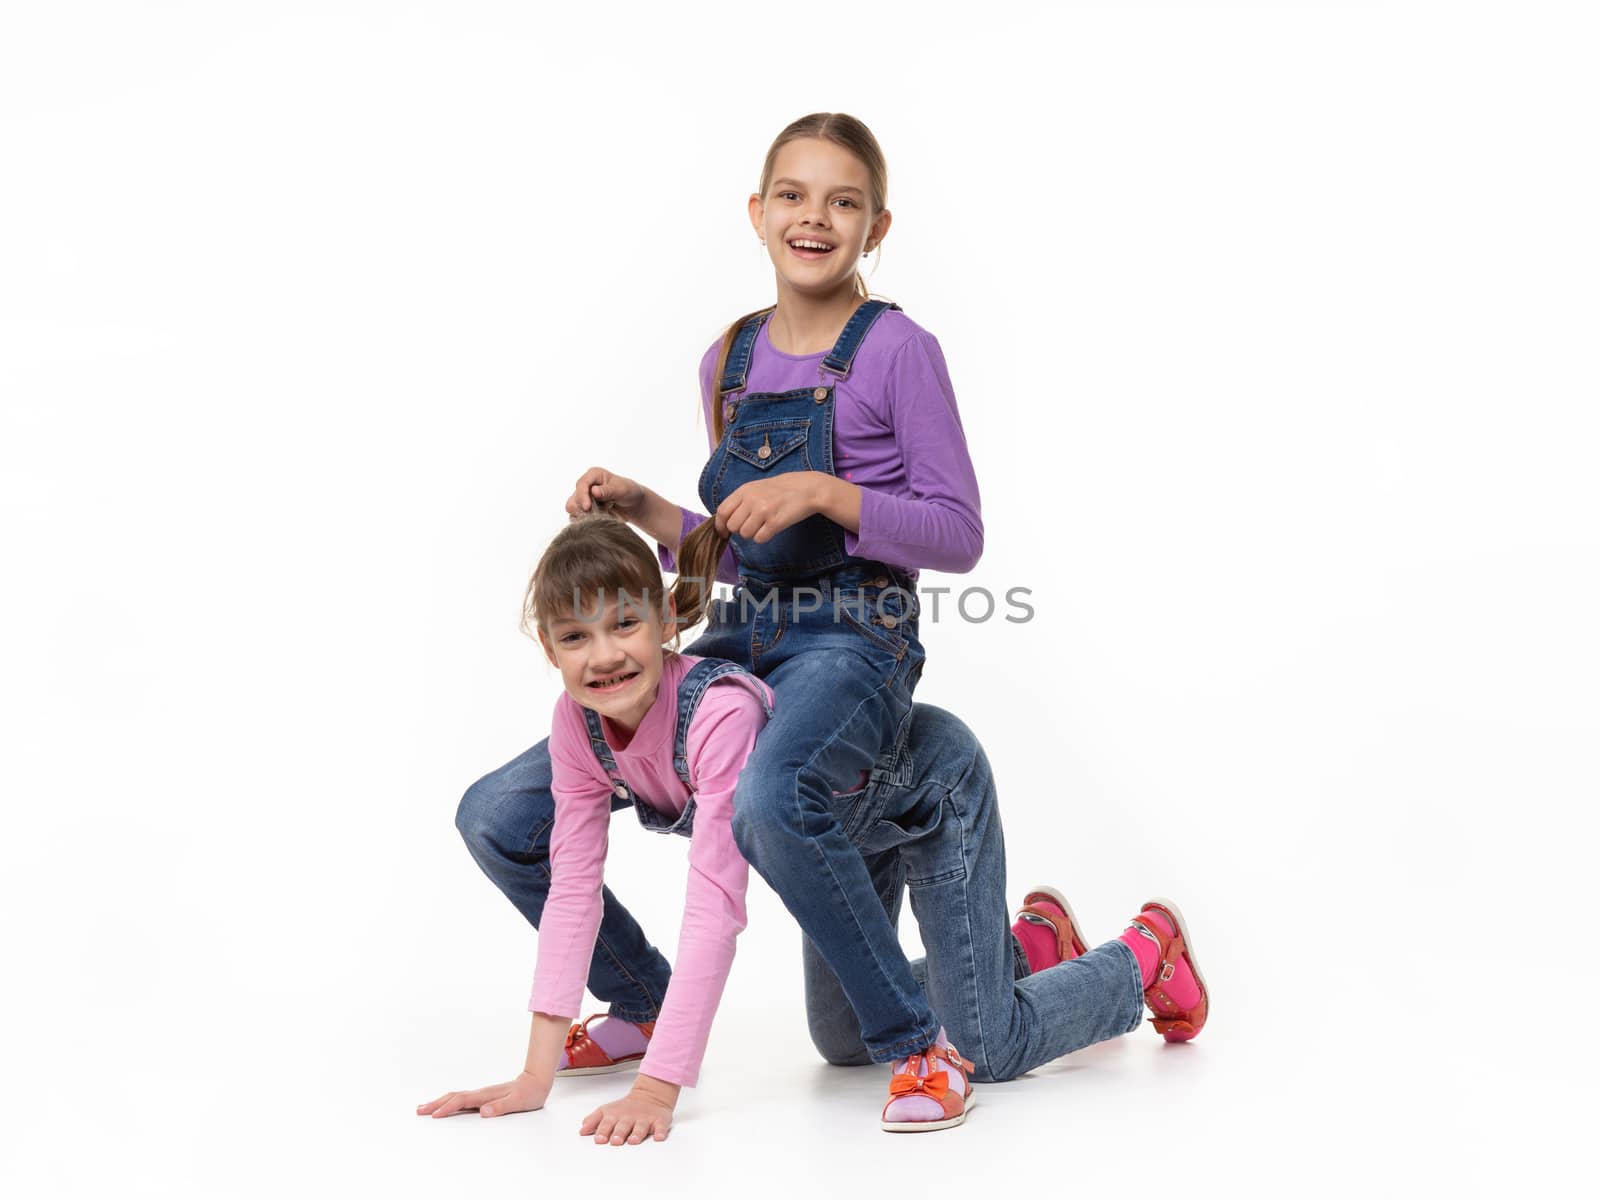 Two sisters play jockey and horse against a white background